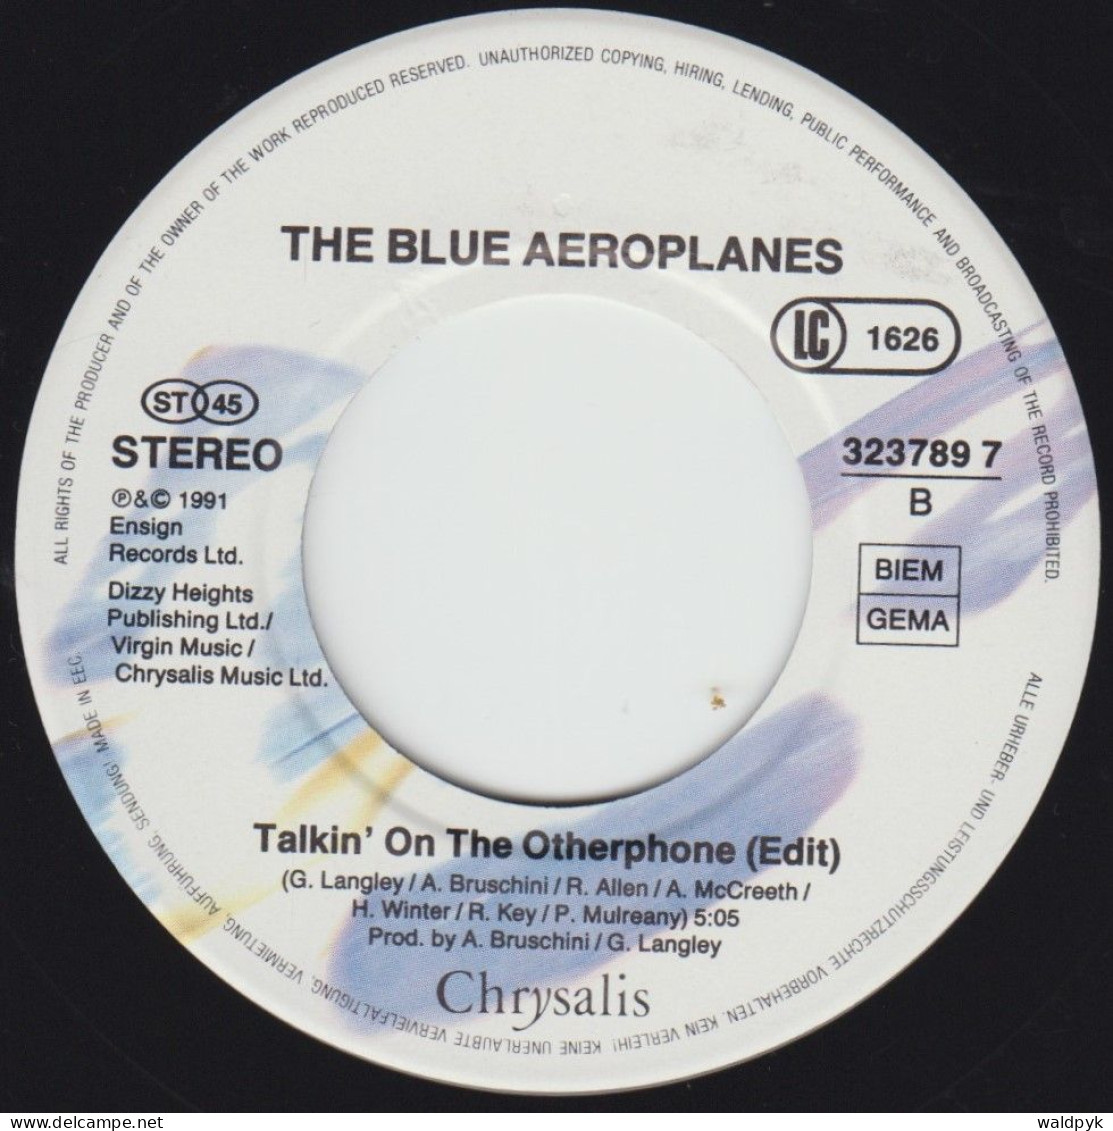 THE BLUE AEROPLANES - The Boy In The Bubble - Other - English Music